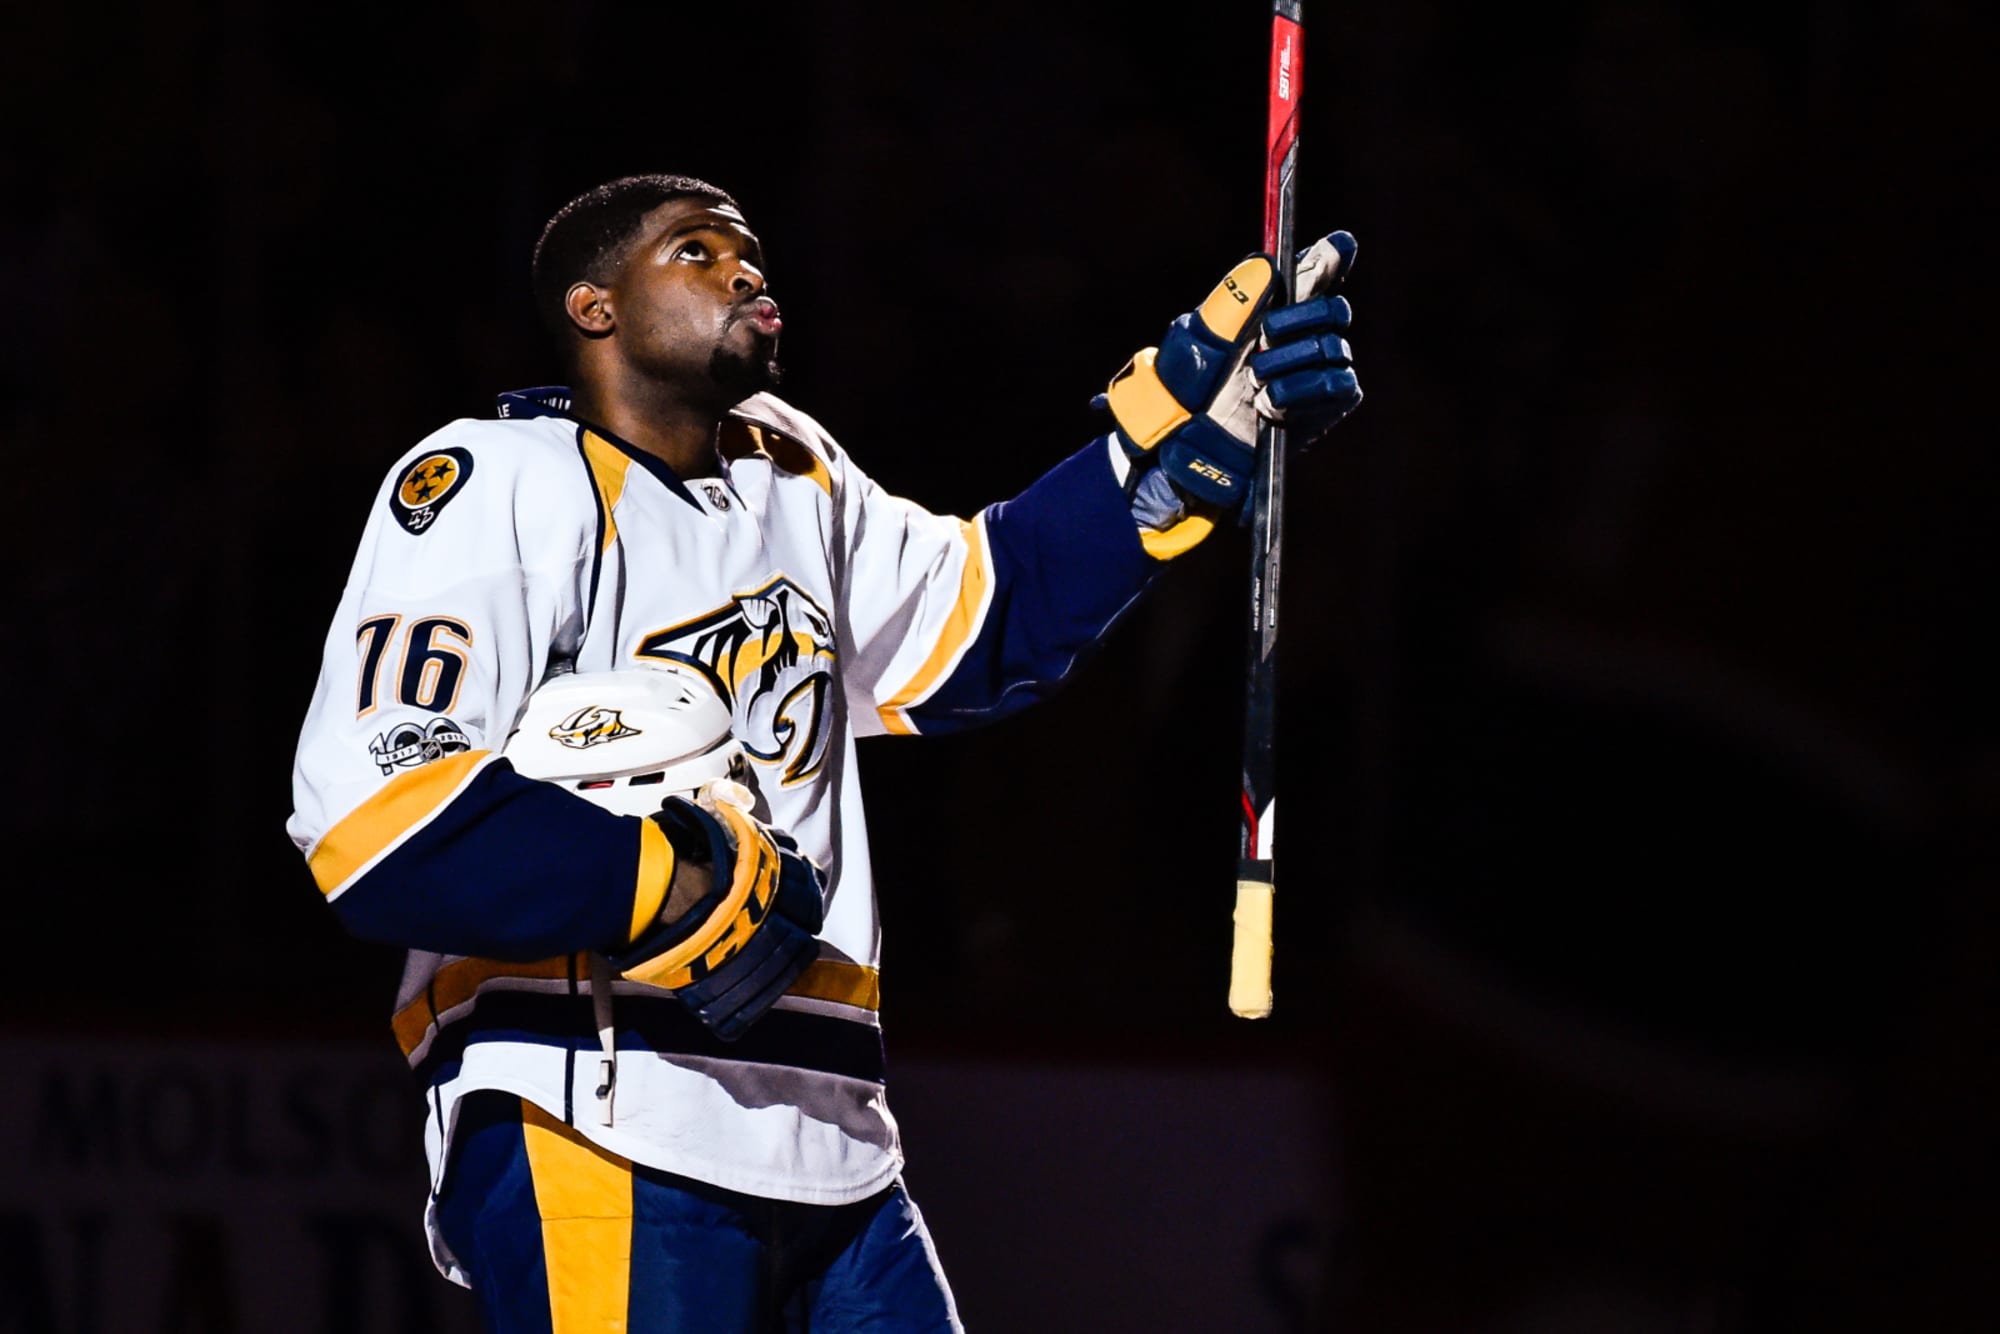 P.K. Subban's expectations, goals of joining the Devils